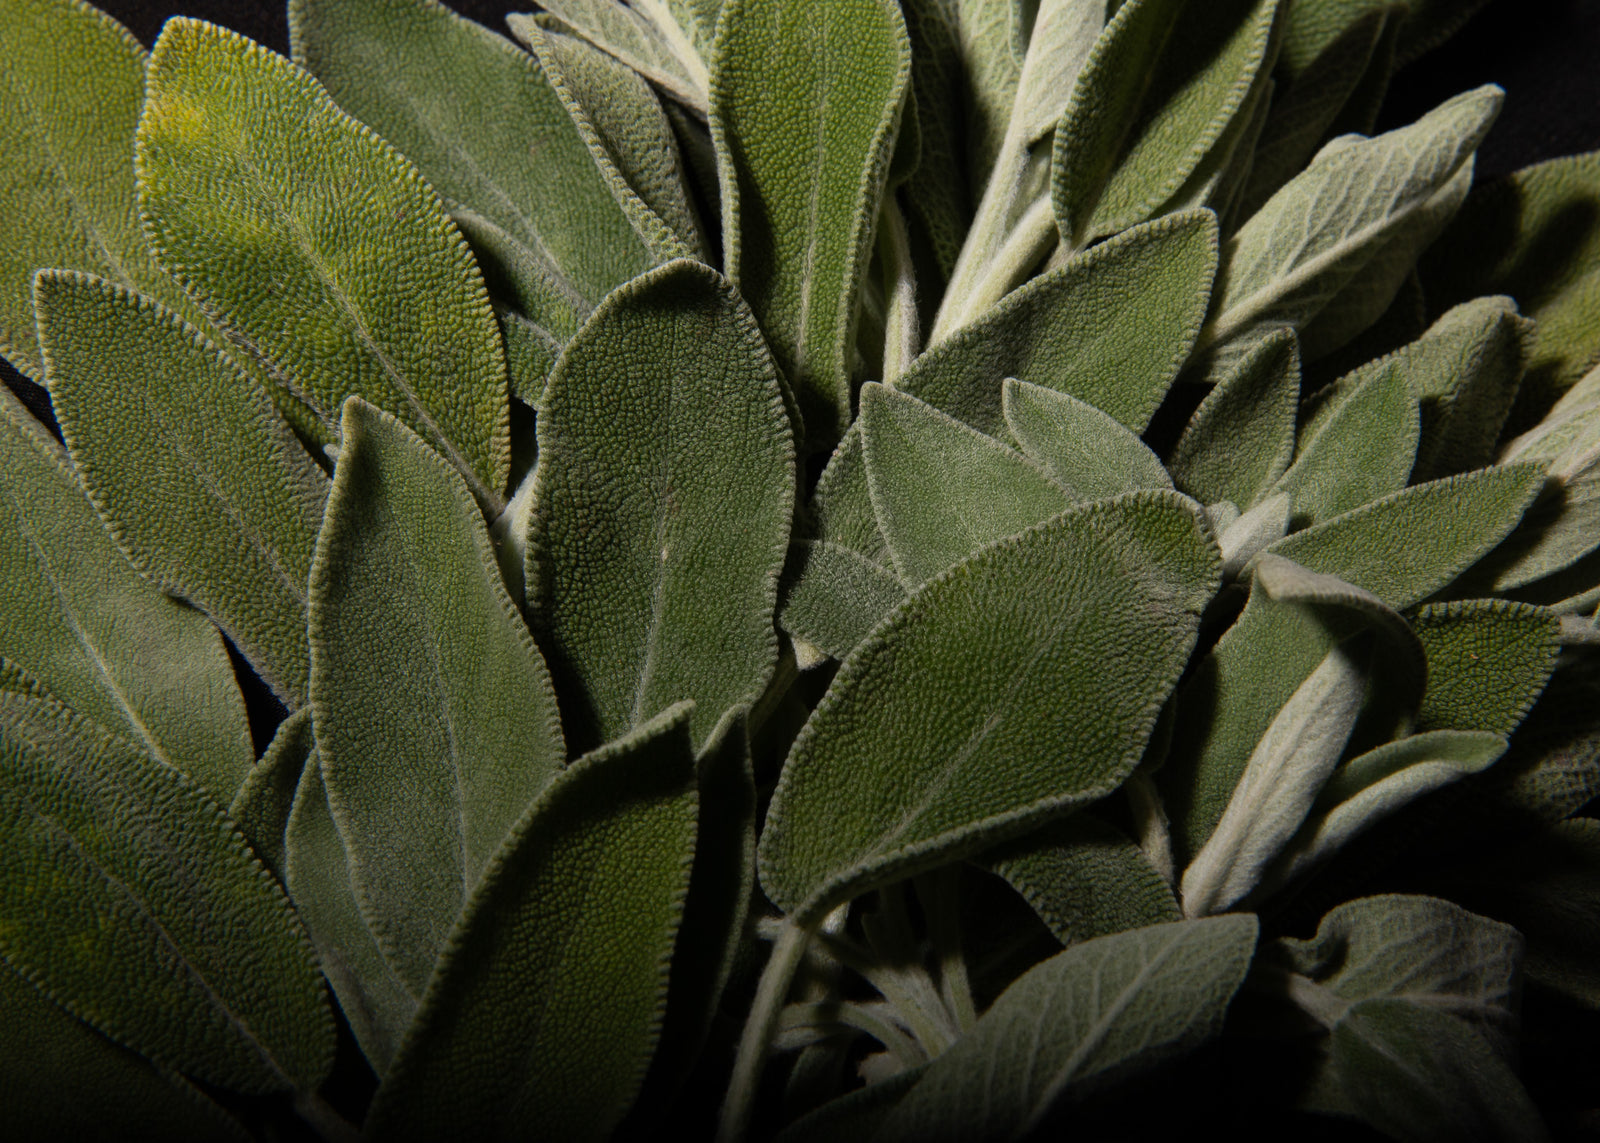 Botanical Brilliance: A Physician's review of Sage